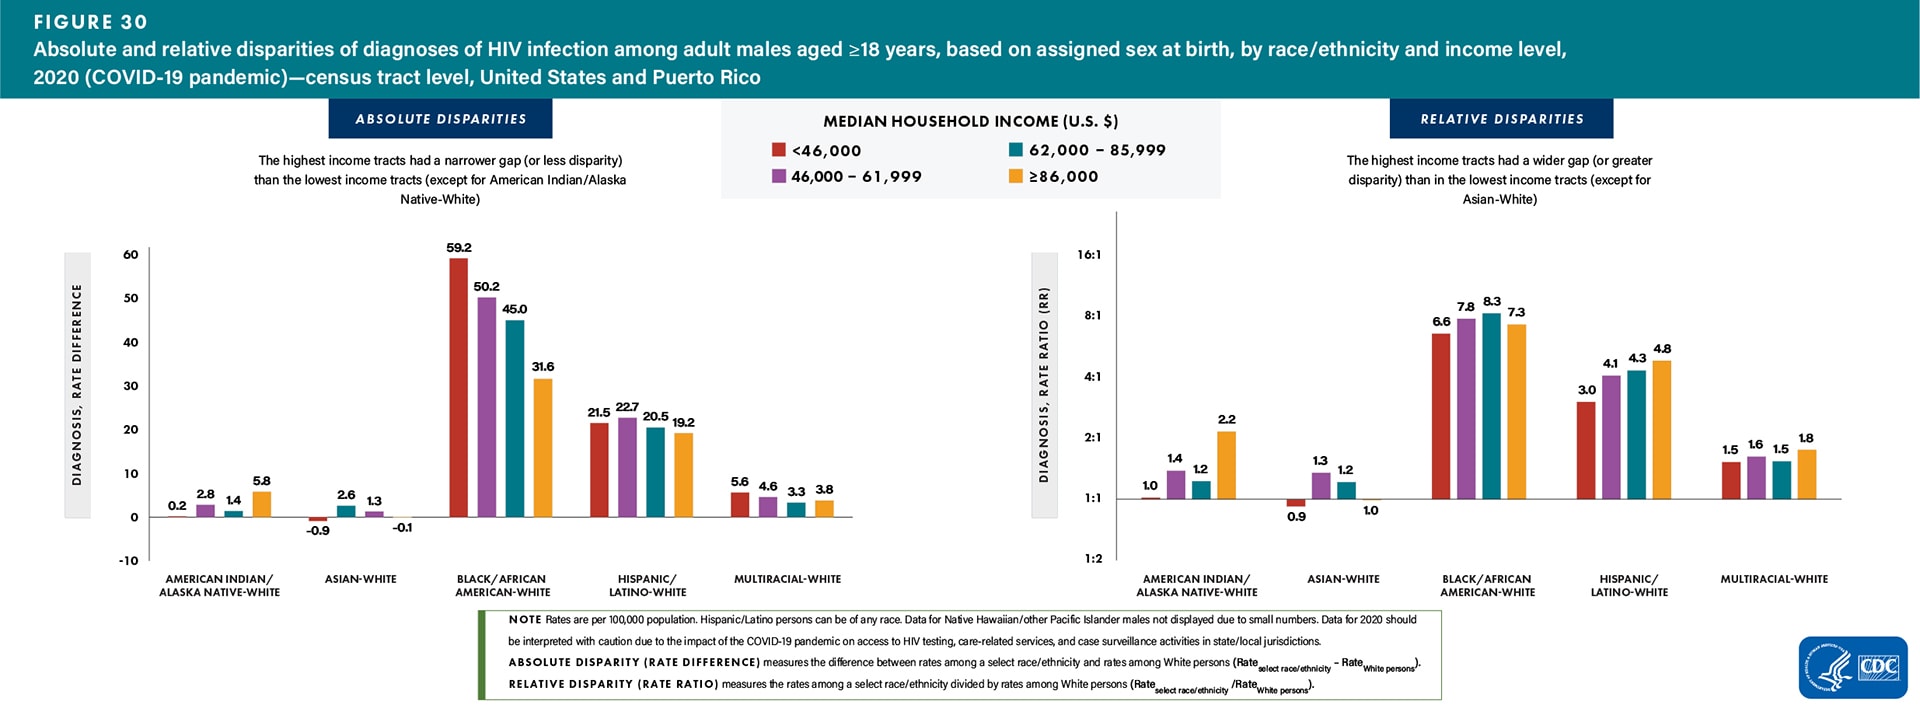 For absolute disparities, the highest income tracts had a narrower gap (or lesser disparity) than in the lowest income tracts (except for American Indian/Alaska Native-White). For relative disparities, the highest income tracts had a wider gap (or greater disparity) than in the lowest income tracts (except for Asian-White).